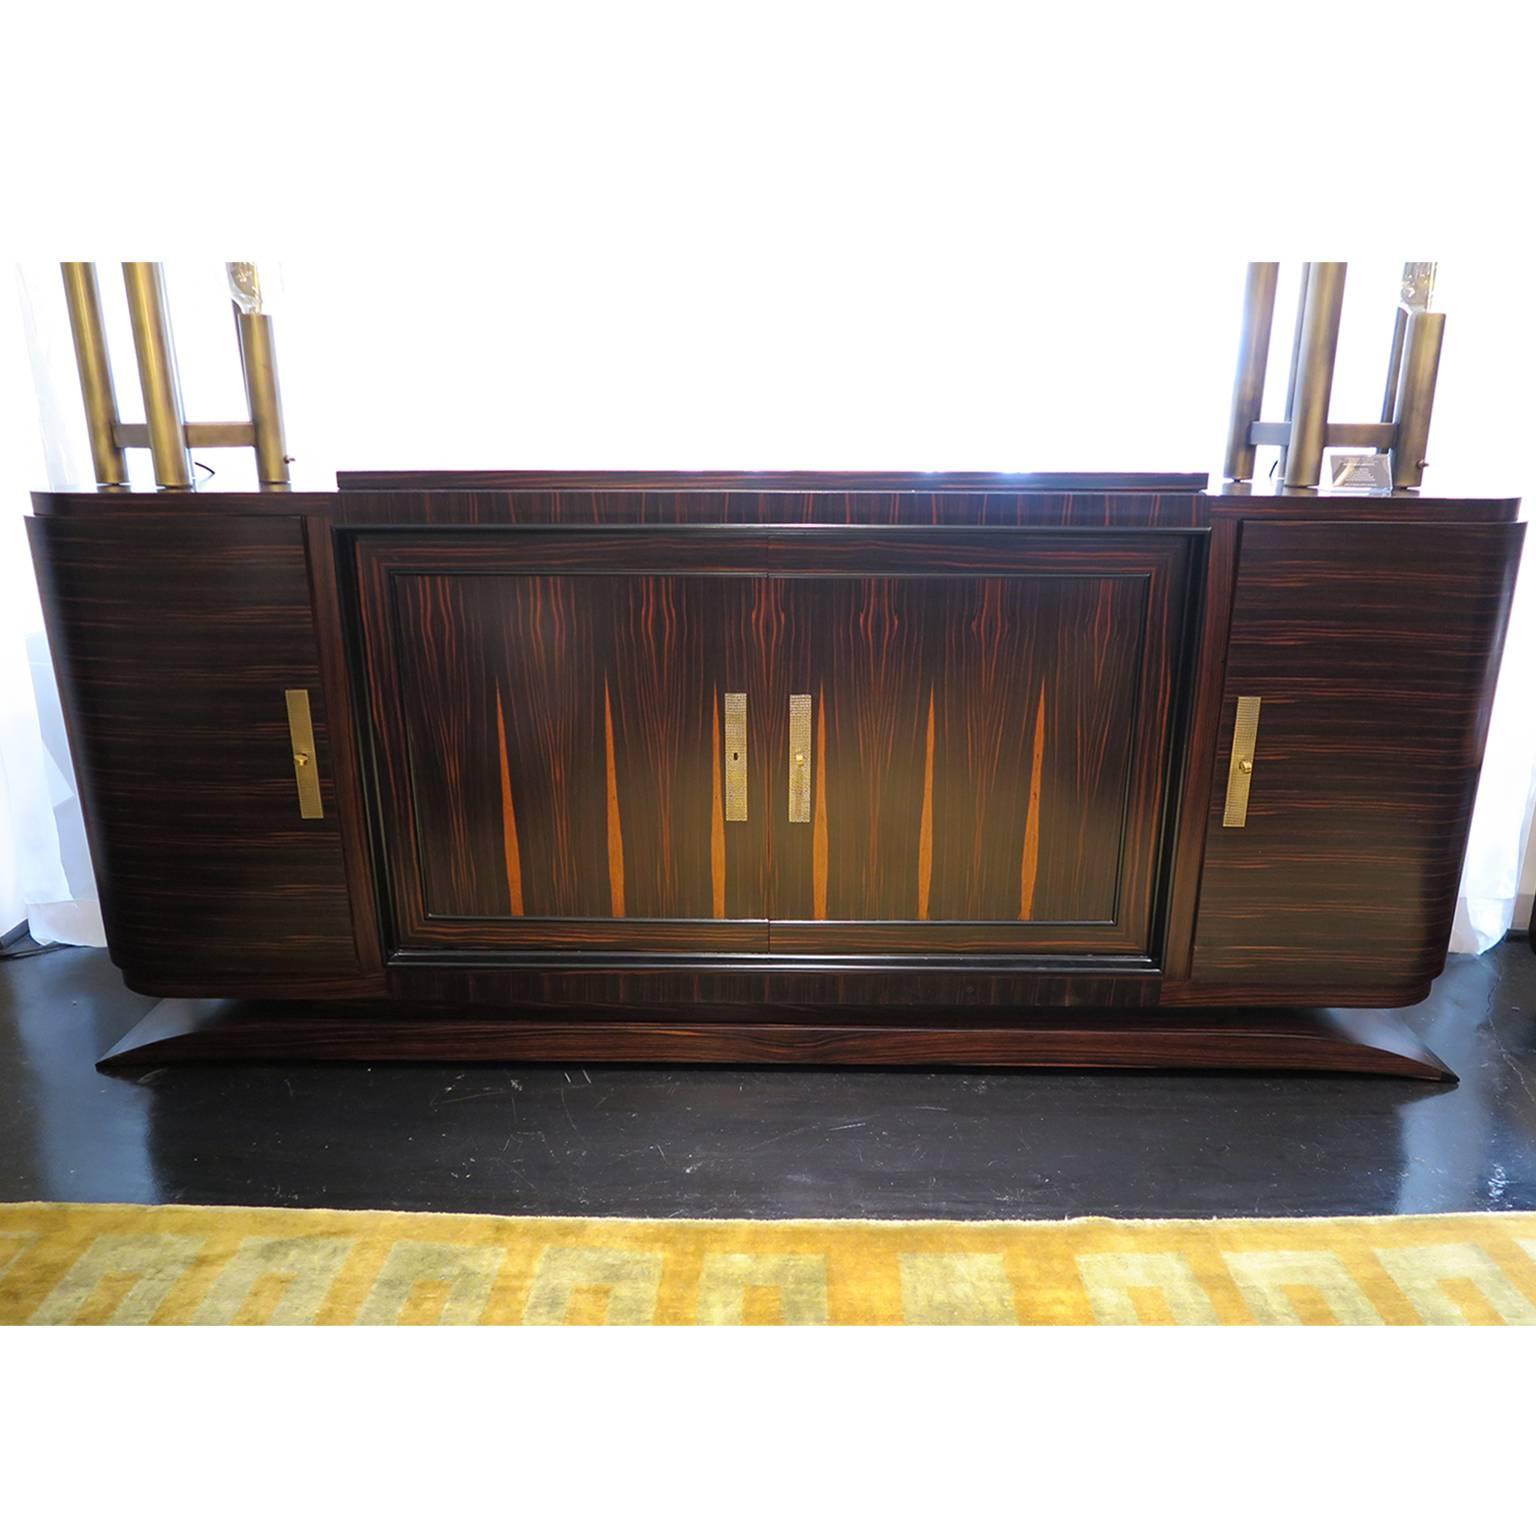 Streamline Art Deco sideboard in Macassar ebony with a matte finish. Custom textured brass rectangular hardware. Center doors open to two drawers and shelf while outside doors open to additional shelving.